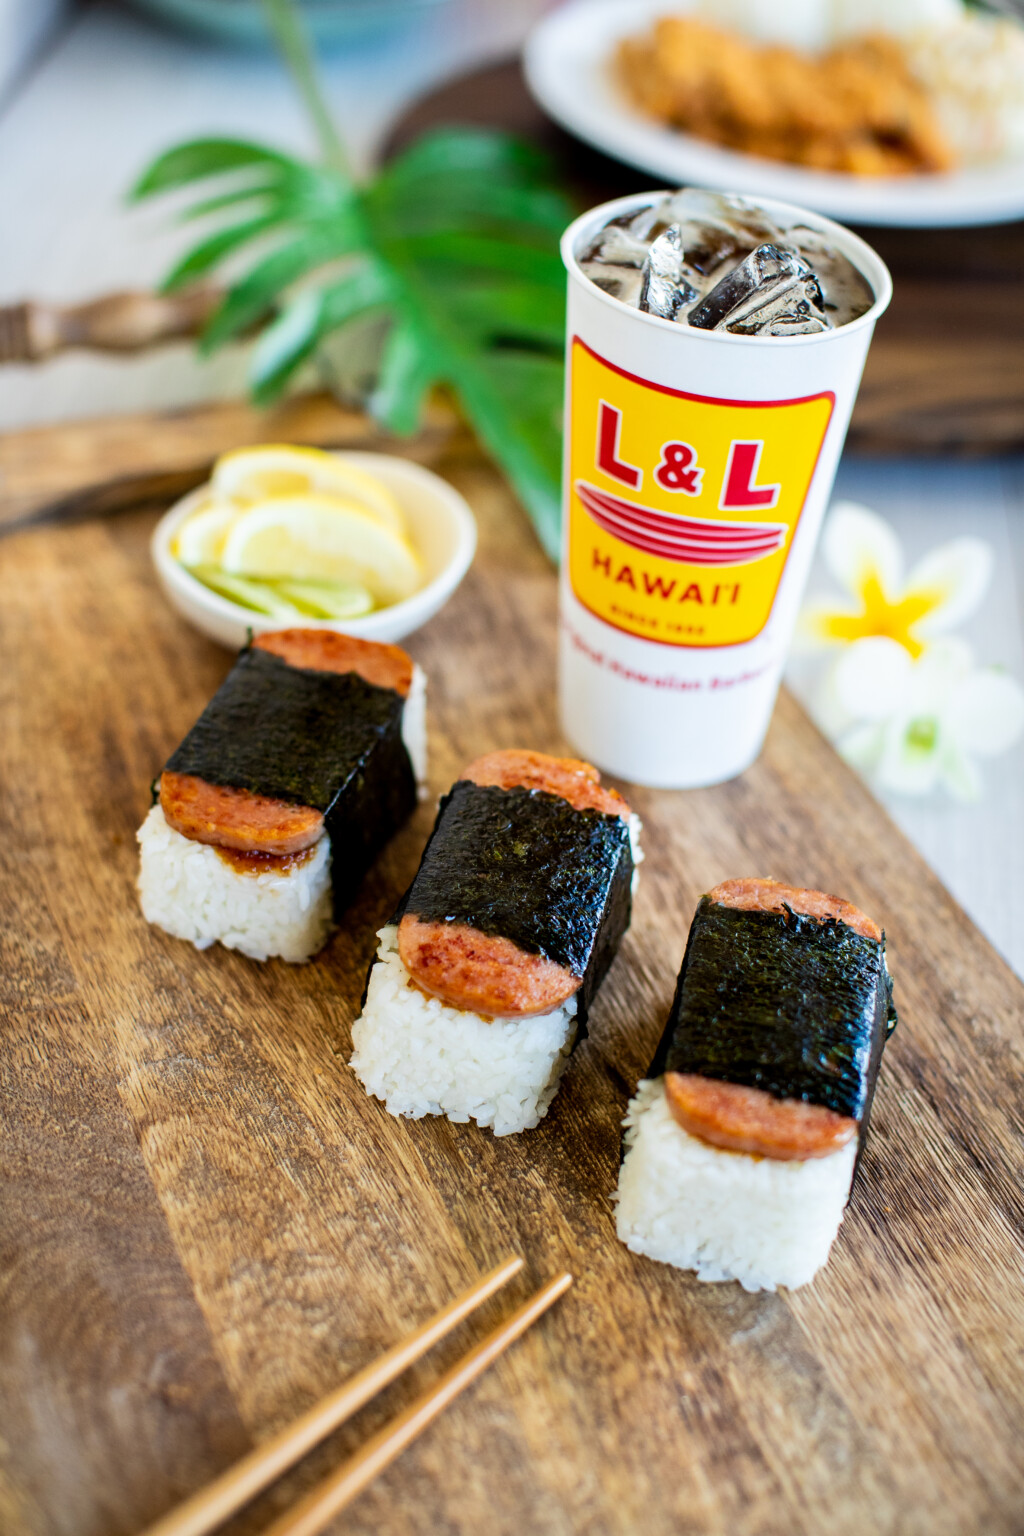 How to get a Free SPAM Musubi on National SPAM Musubi Day Hawaii Magazine